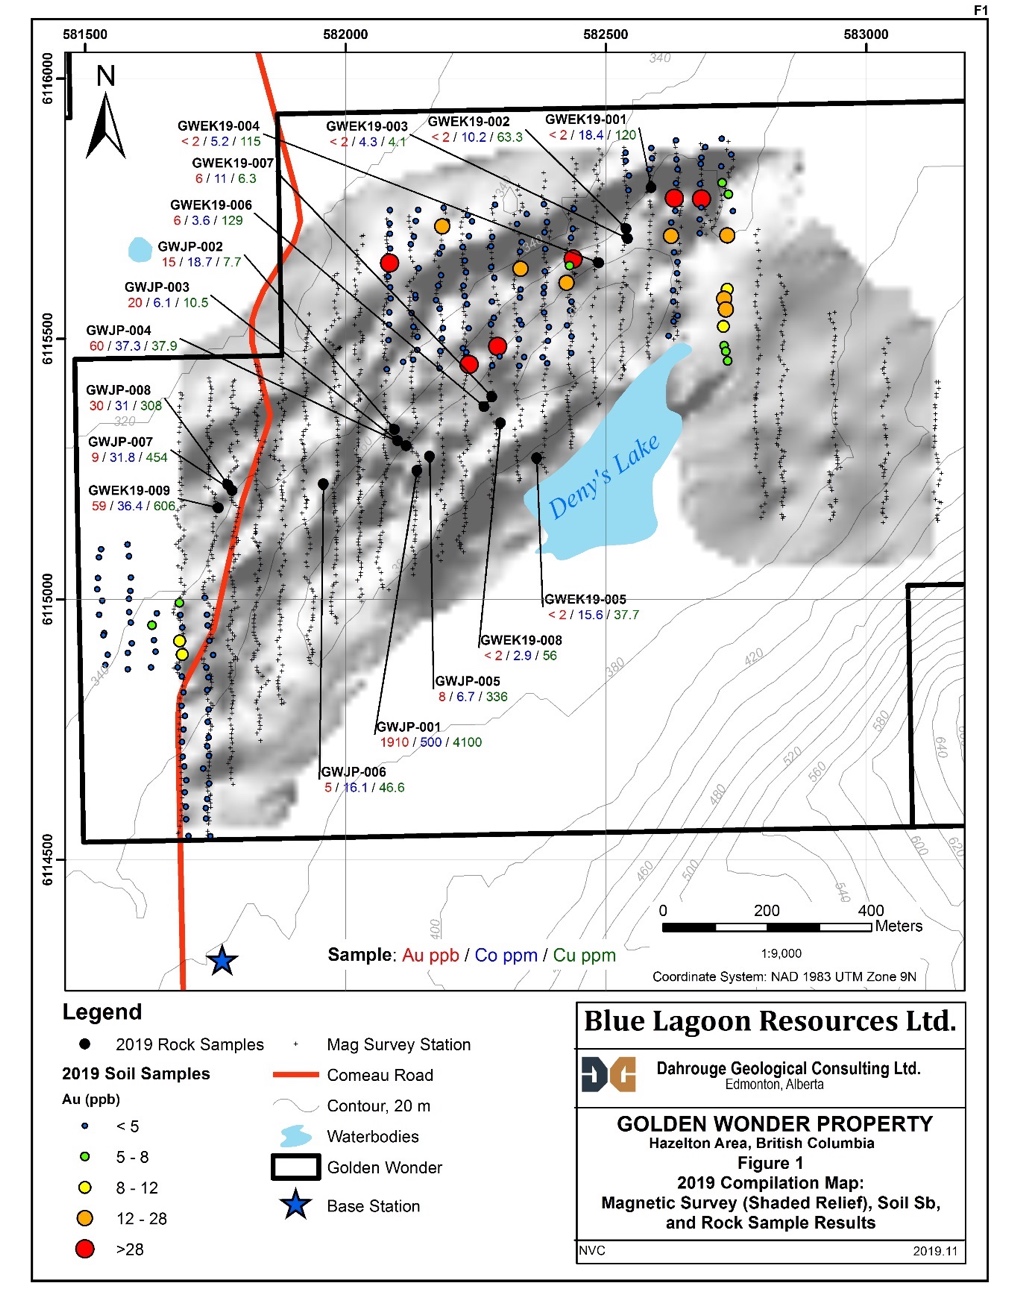 Blue Lagoon Resources Inc. , Tuesday, December 3, 2019, Press release picture